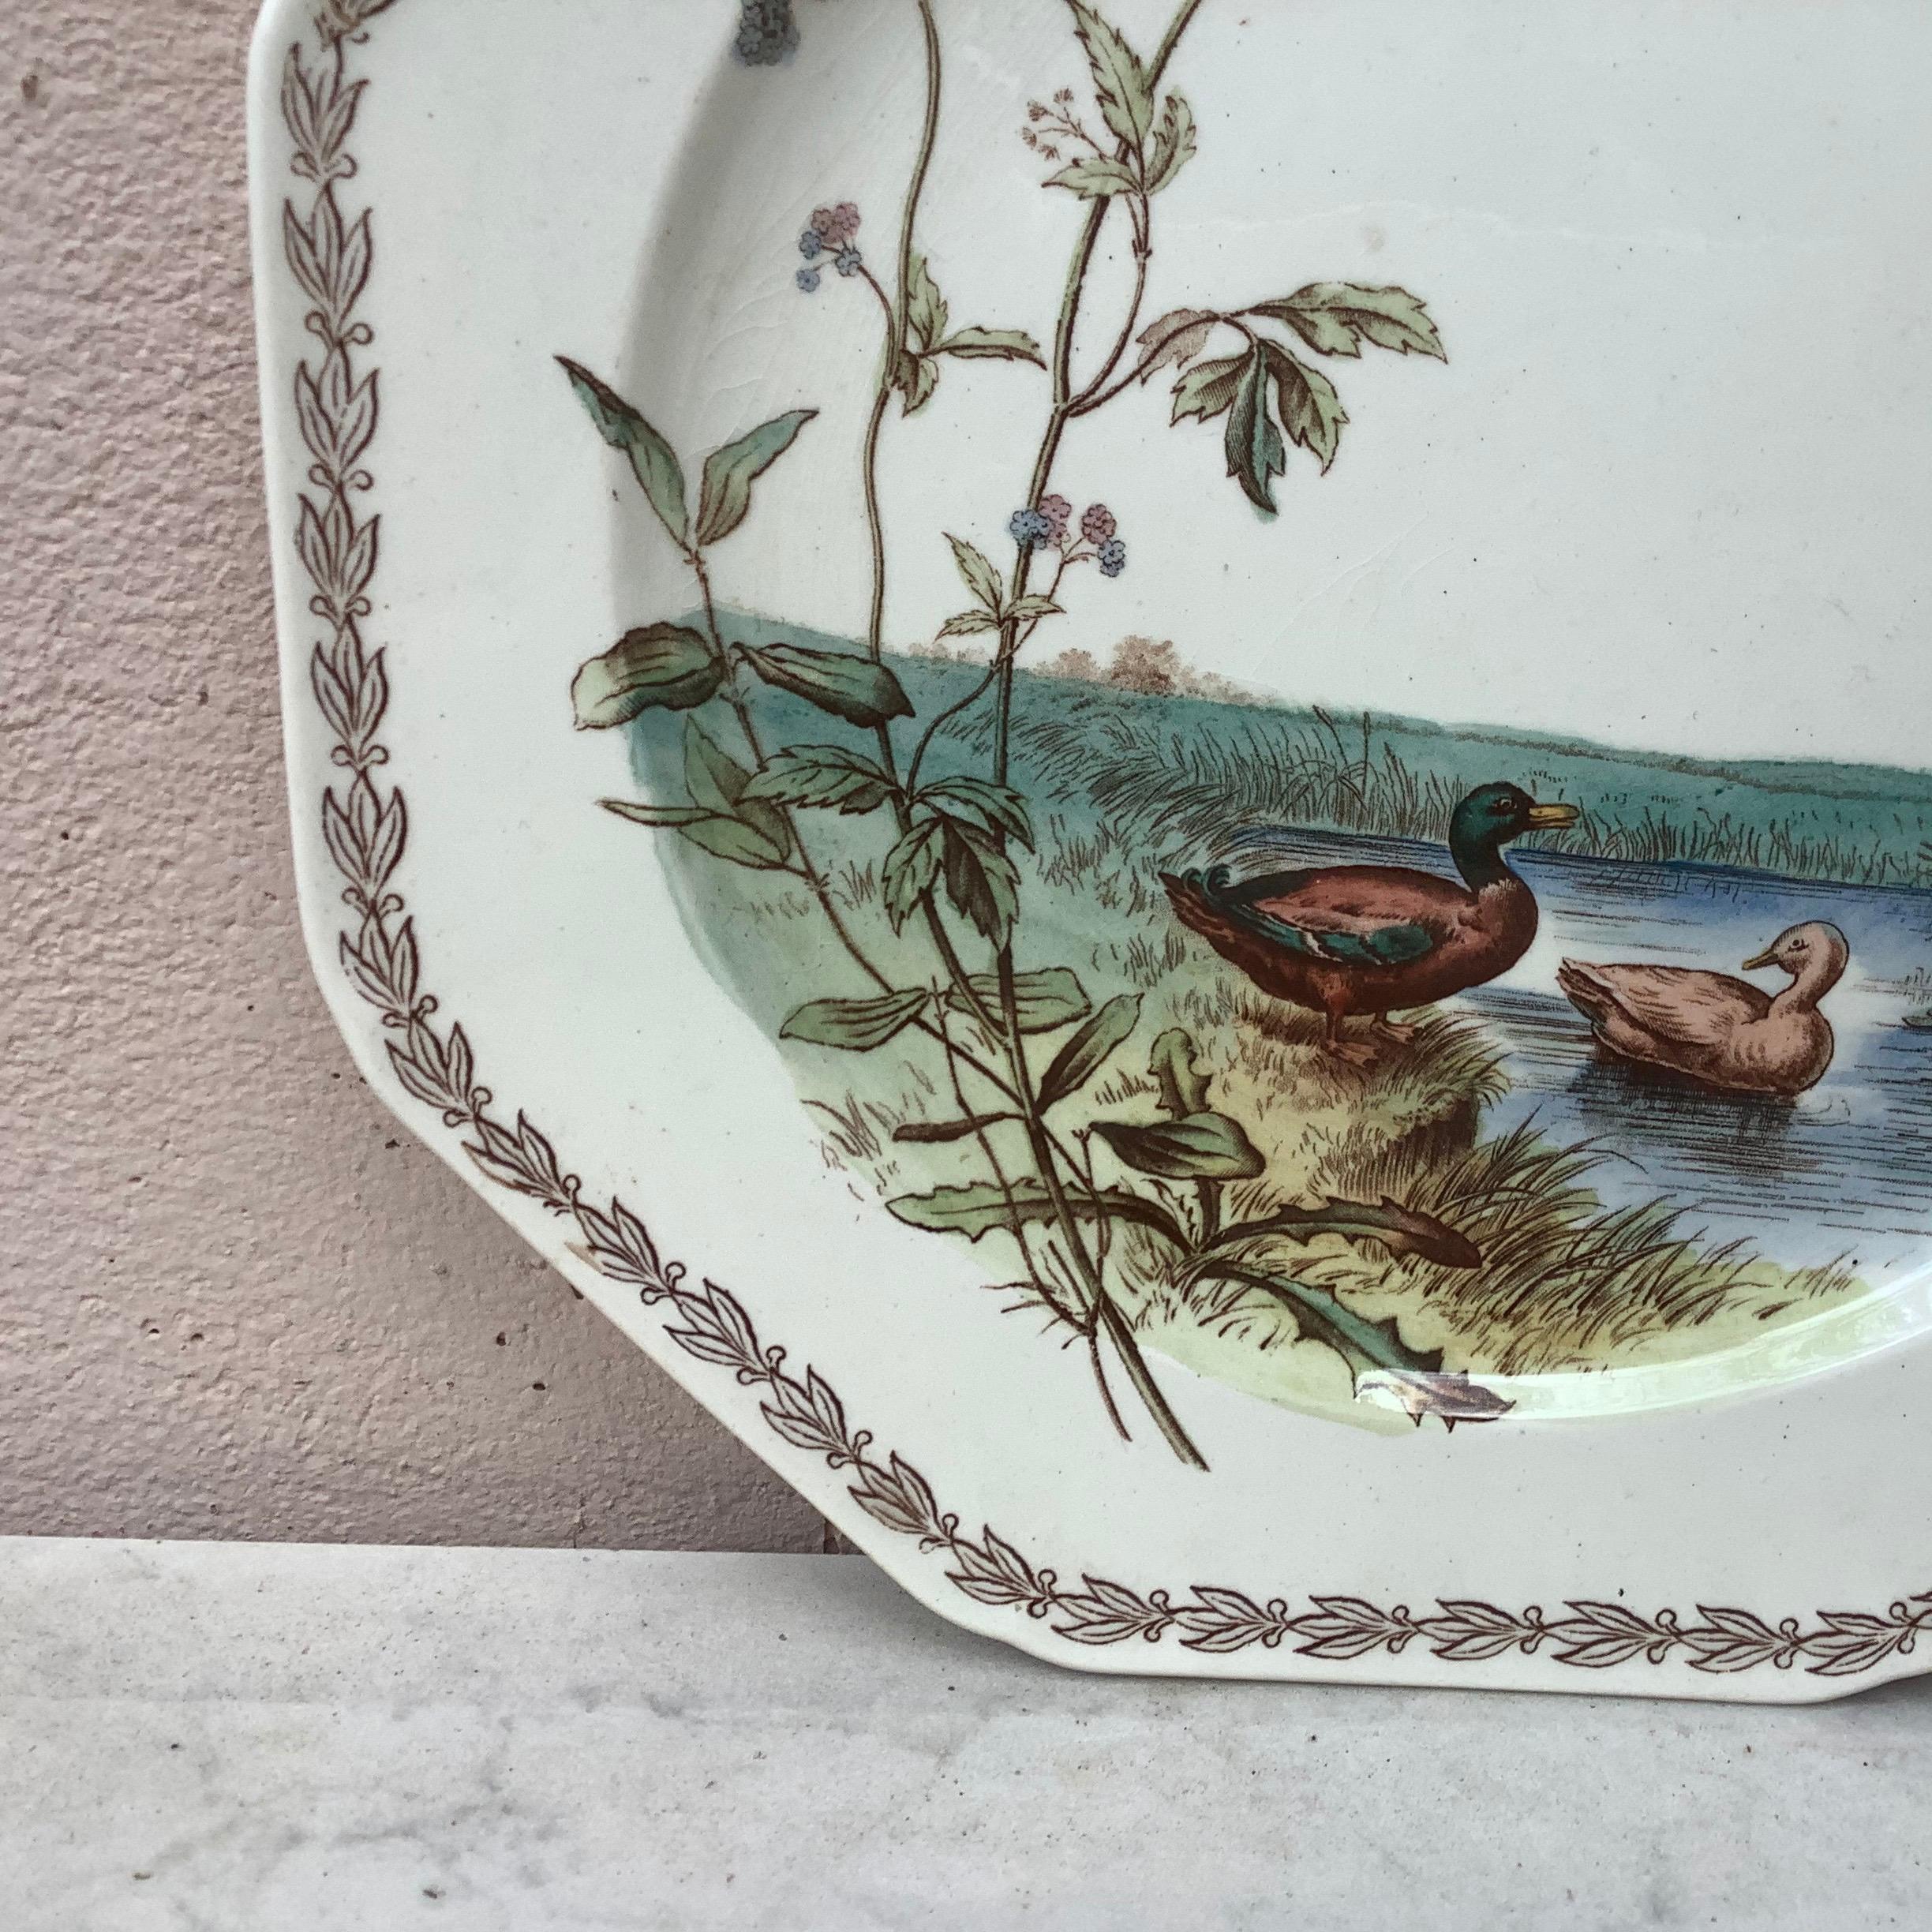 English octagonal plate ducks on the lake, circa 1890.
English mark TC Brown Westhead and Moore.
Sold at the Grand depot 21 rue Drouot, Paris.